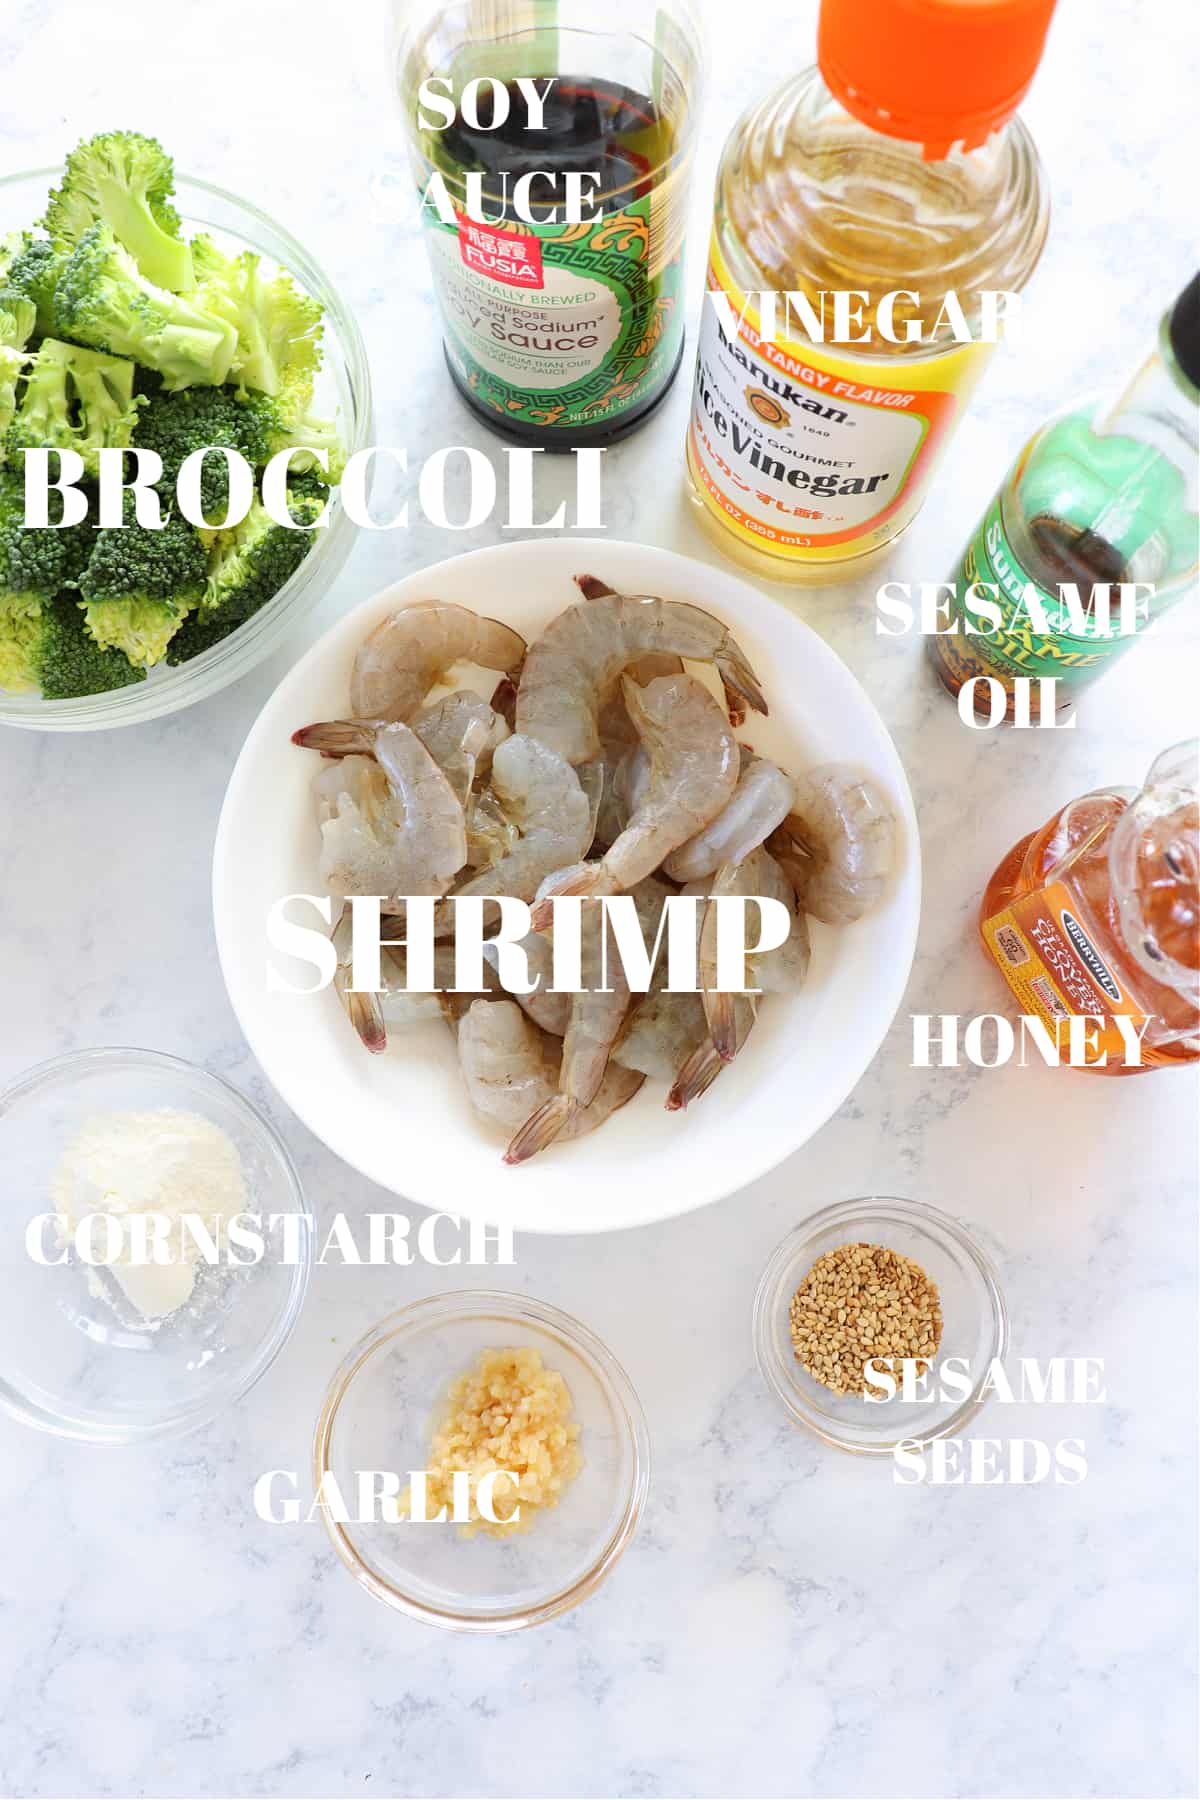 Ingredients for shrimp and broccoli stir fry on a board.